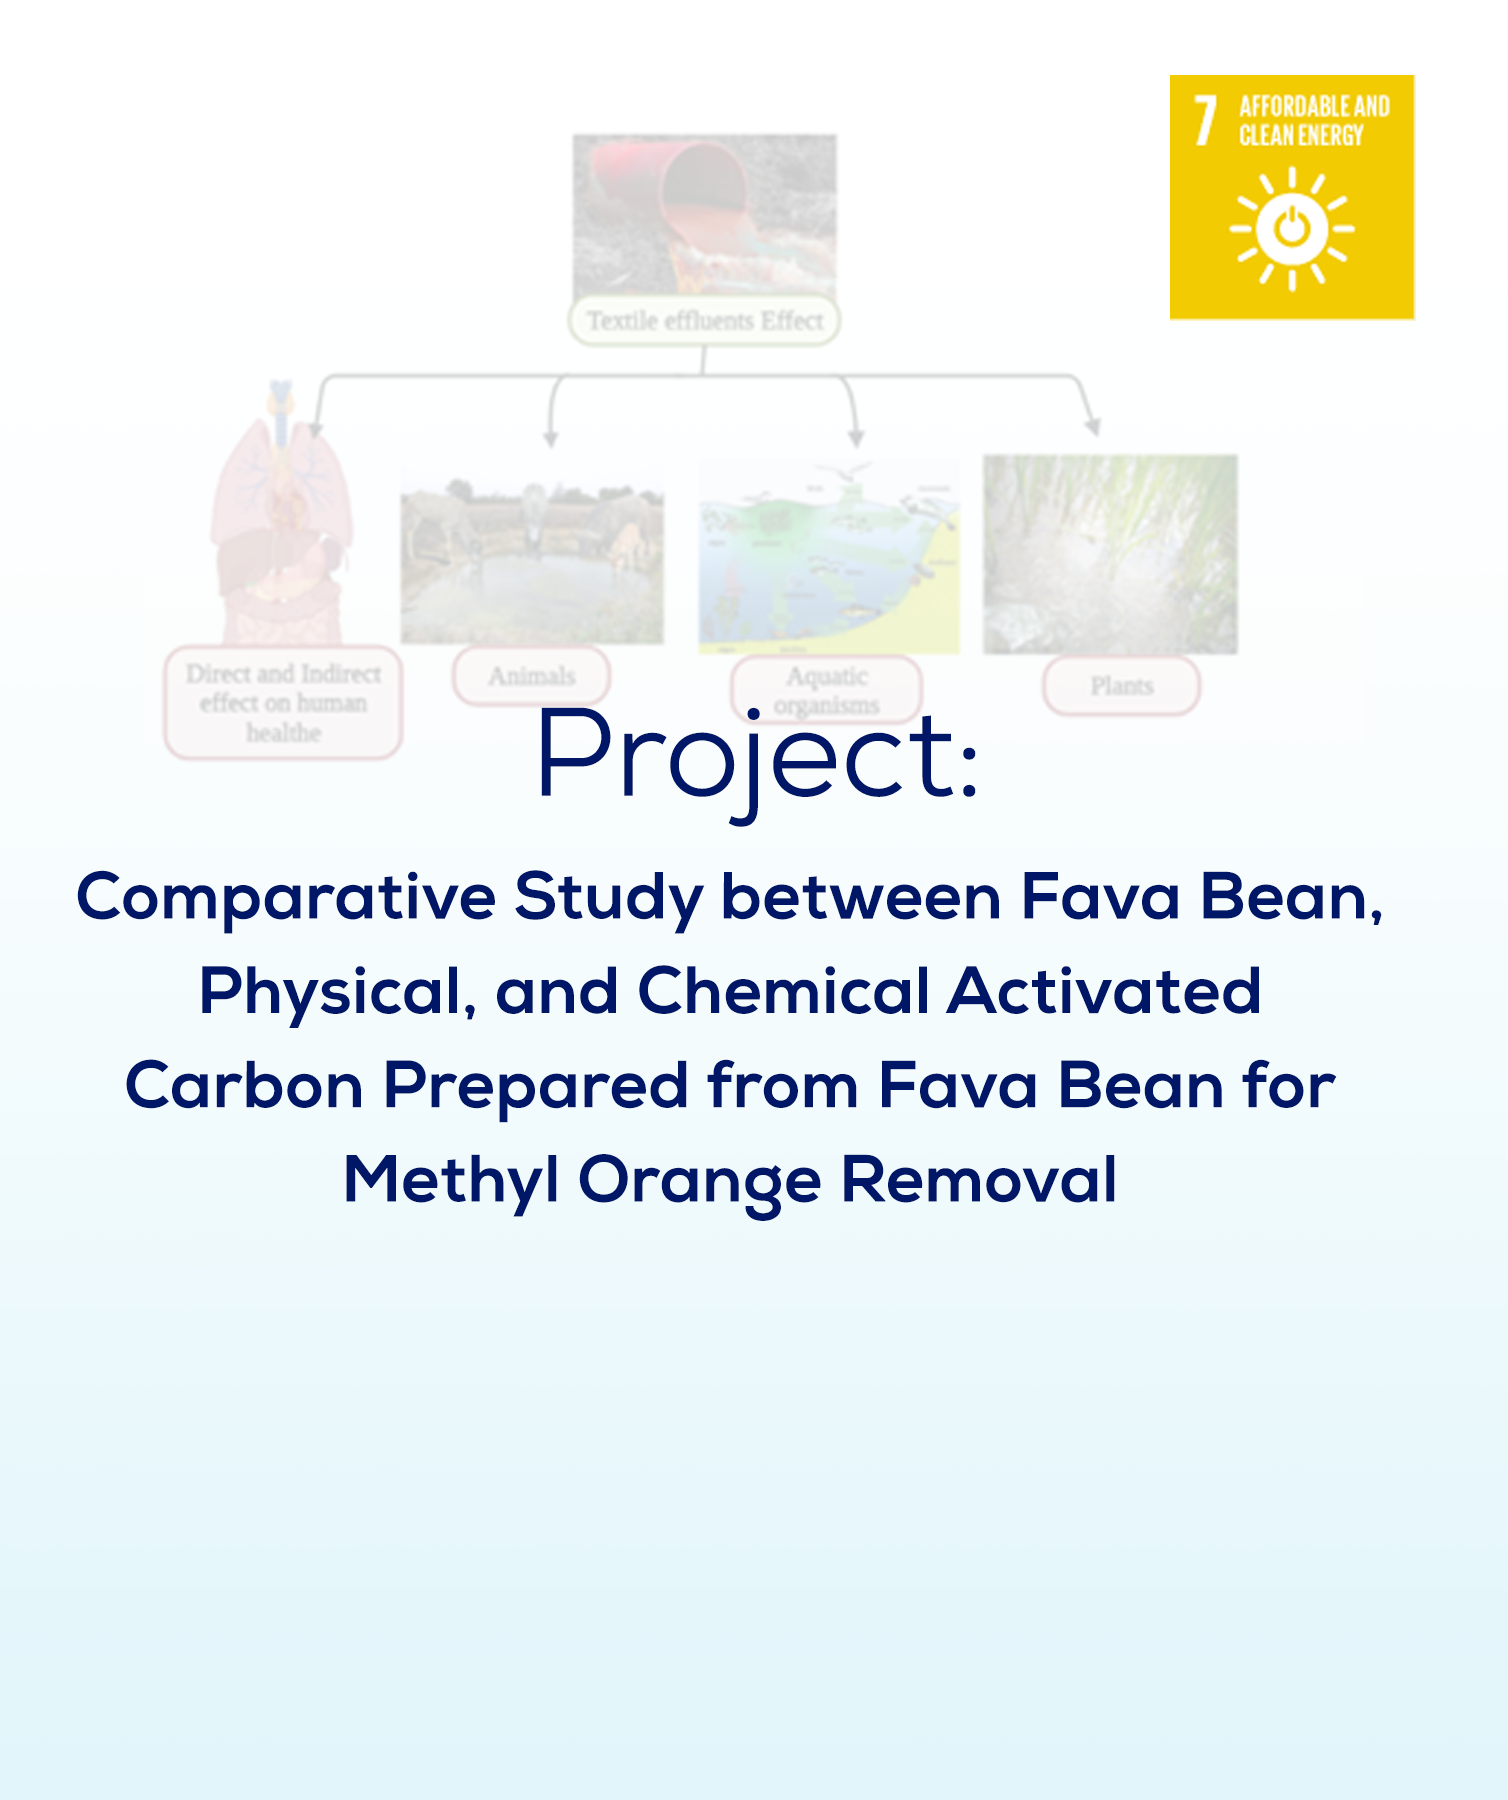 Comparative Study between Fava Bean, Physical, and Chemical Activated Carbon Prepared from Fava Bean for Methyl Orange Removal.